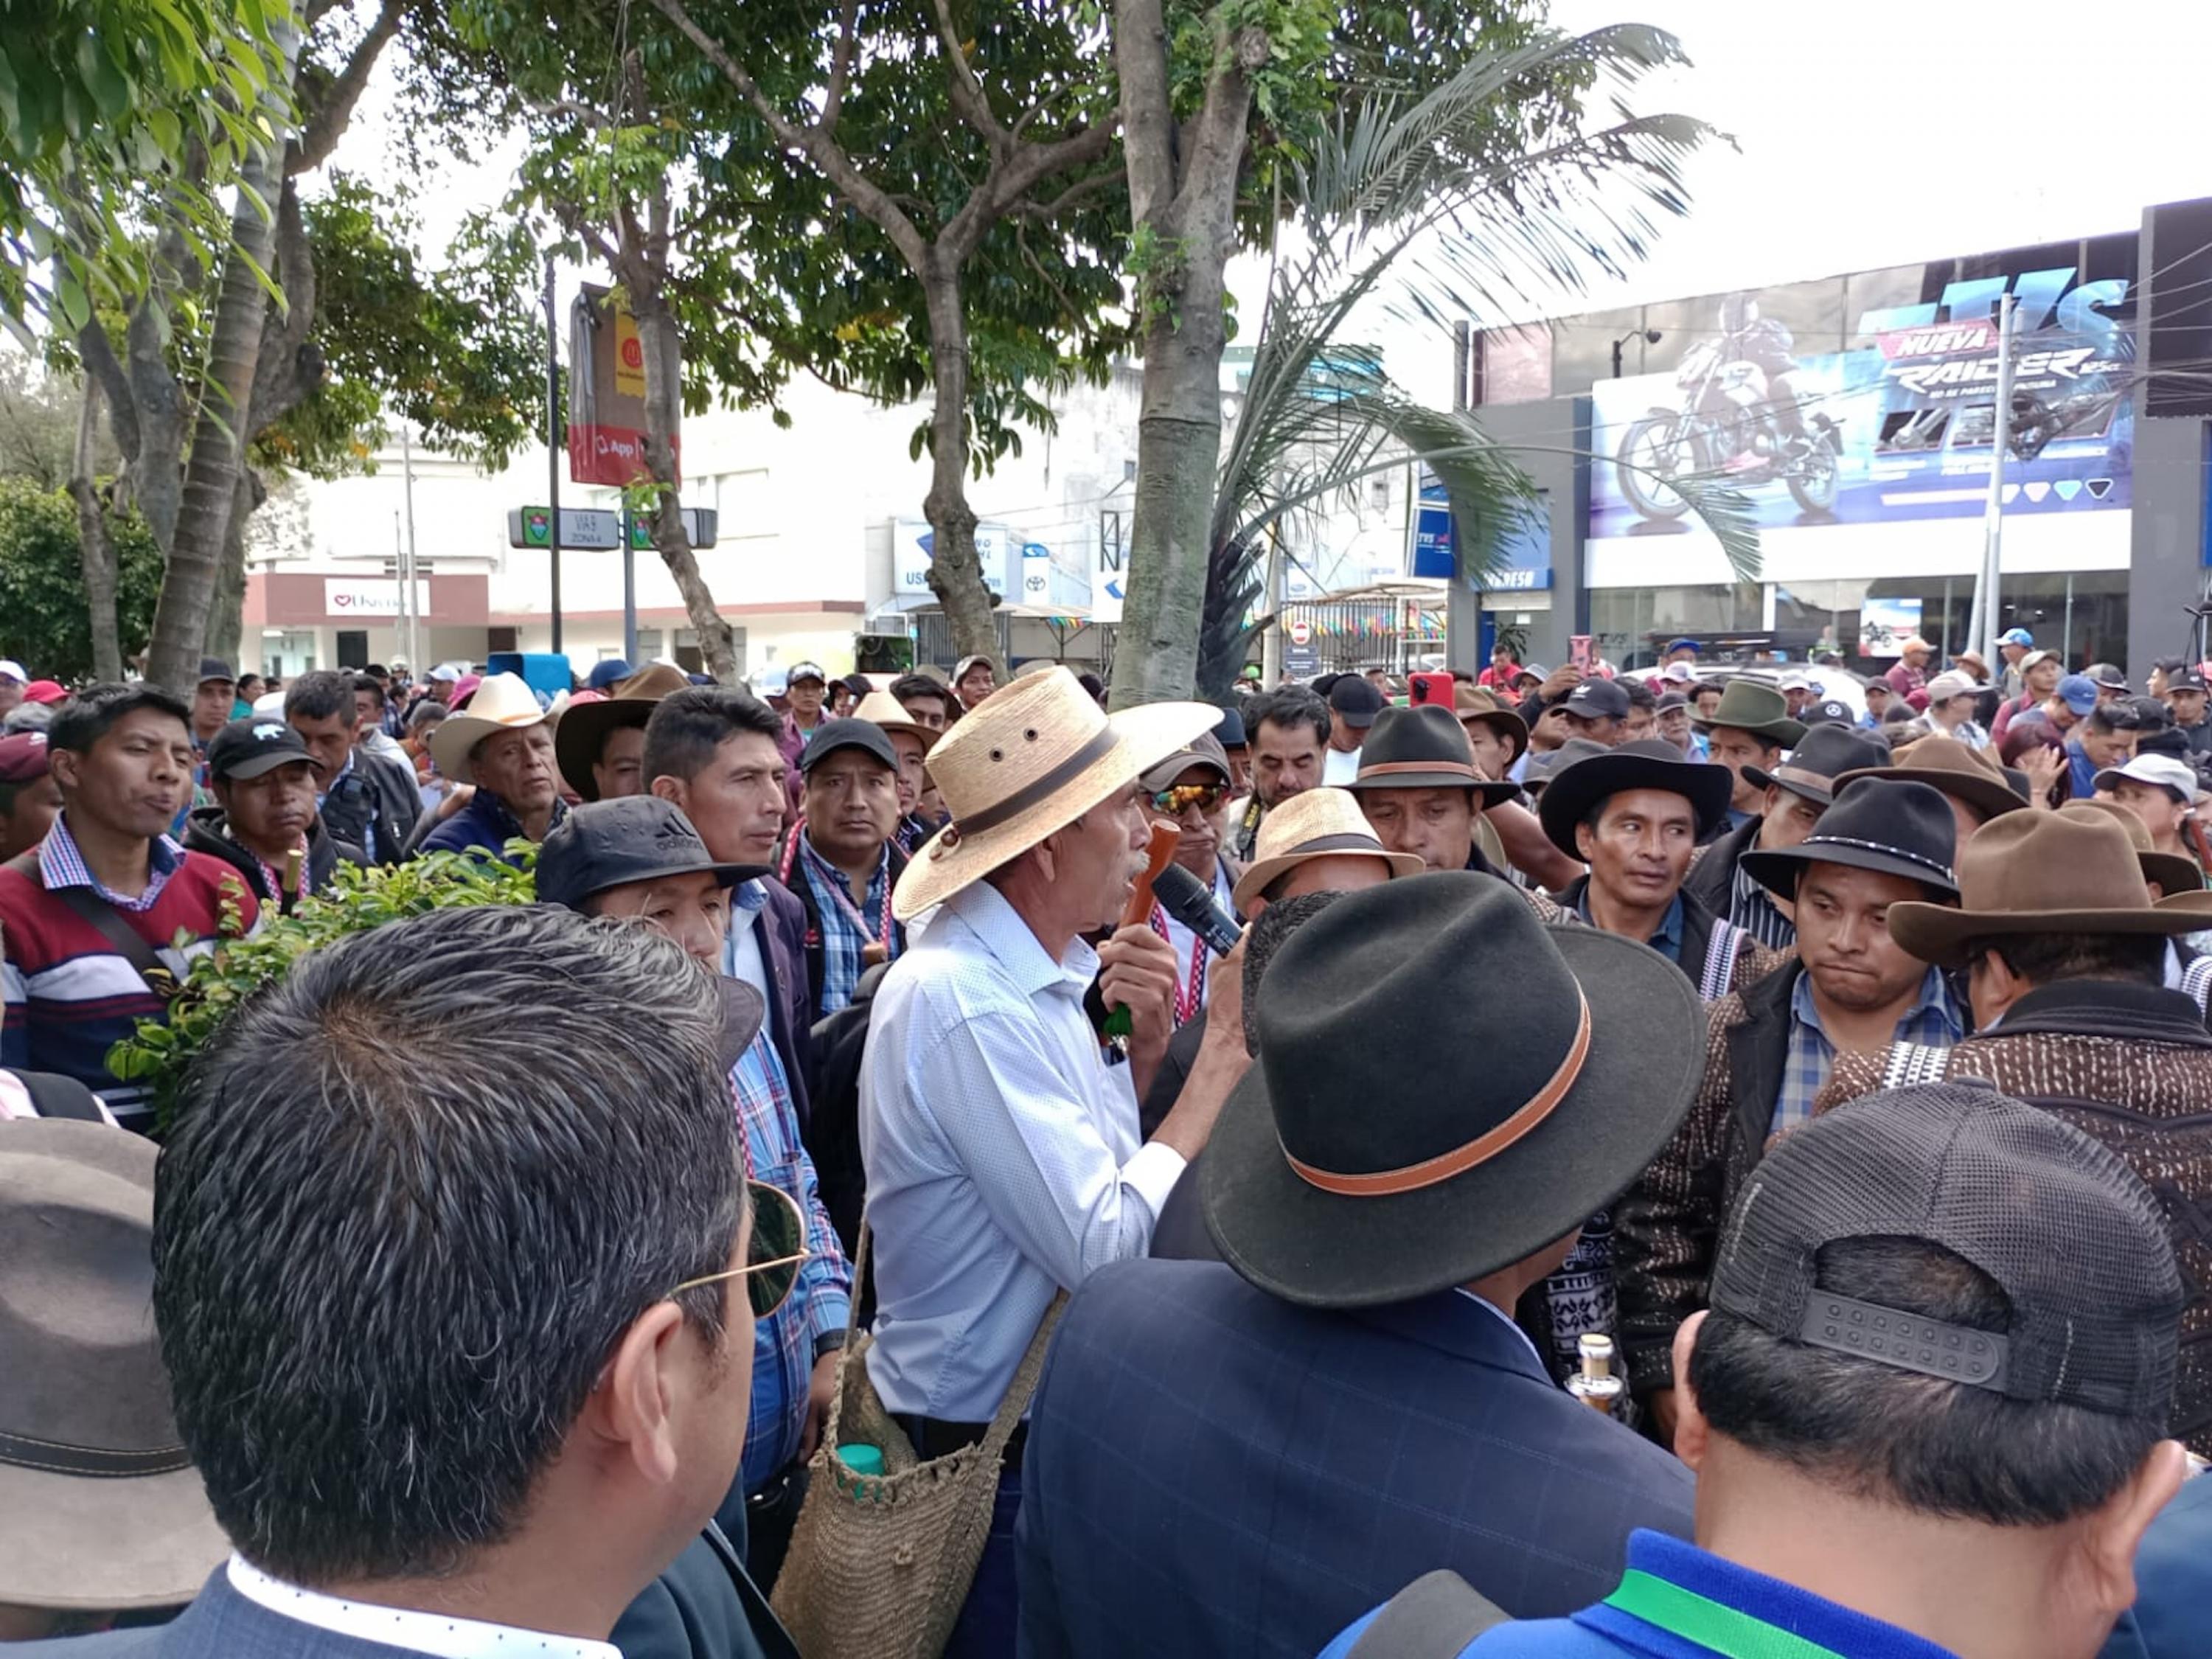 Members of the Xinka Parliament arrived in Guatemala City on Sep. 18, 2023 amid sustained judicial interference in the electoral process. “We #IndigenousPeoples organize against the attempted #CoupdEtat and demand the resignation of #ConsueloPorras, #RafaelCurruchiche, #CintiaMonterroso, and #FredyOrellana,” wrote the Parliament on X.